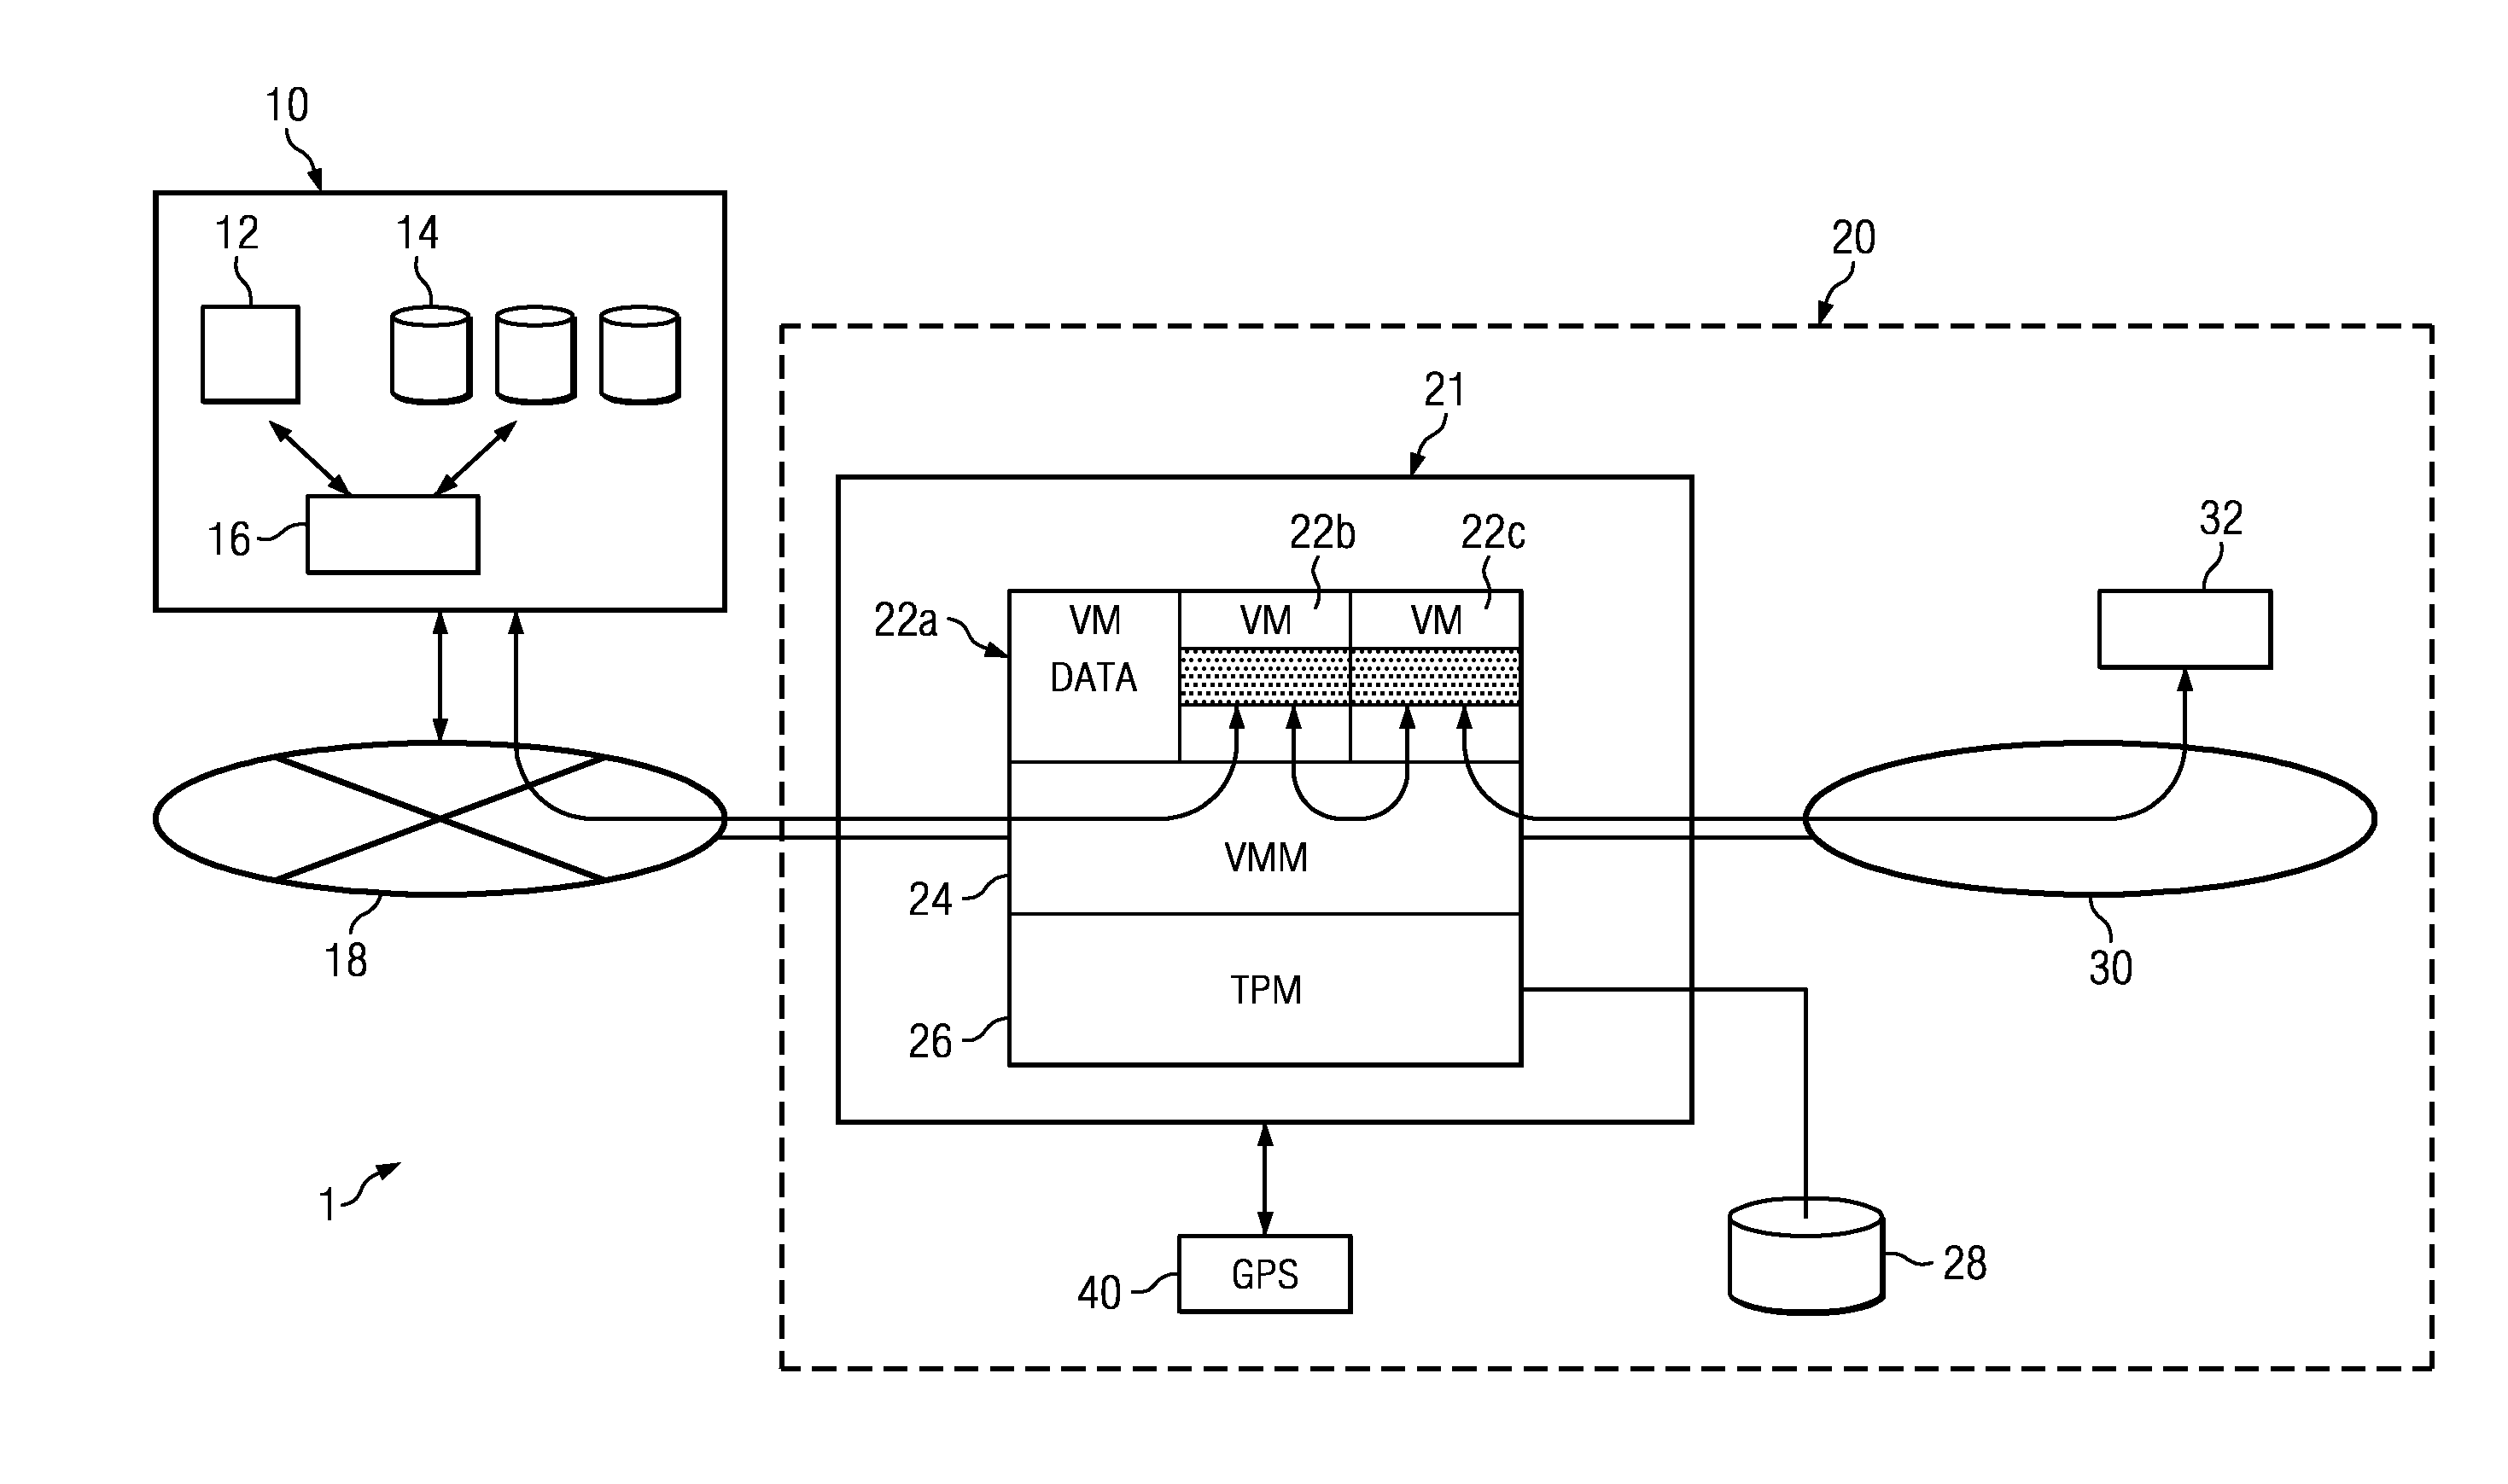 System and methods for remote maintenance in an electronic network with multiple clients